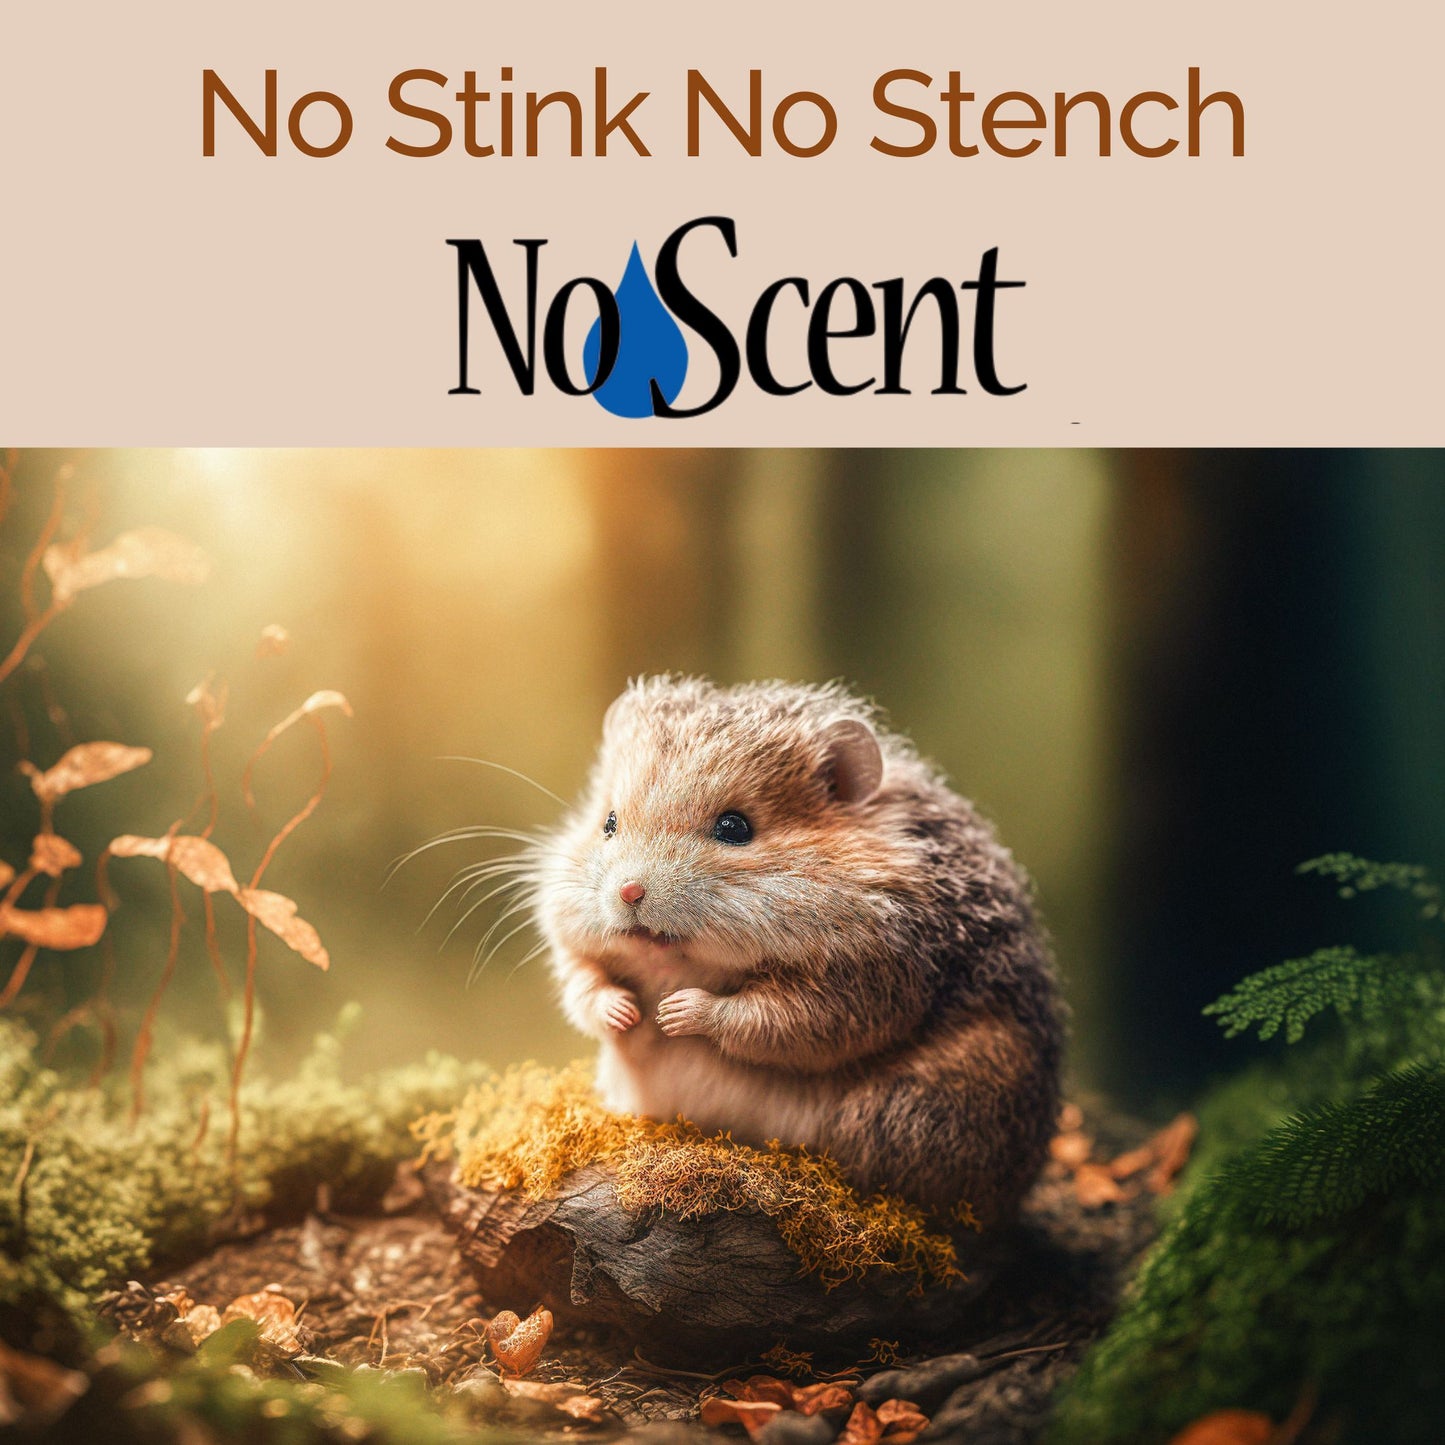 No Scent Small Animal Pet Odor Cleaner for Hamster, Guinea Pig Cages & Accessories